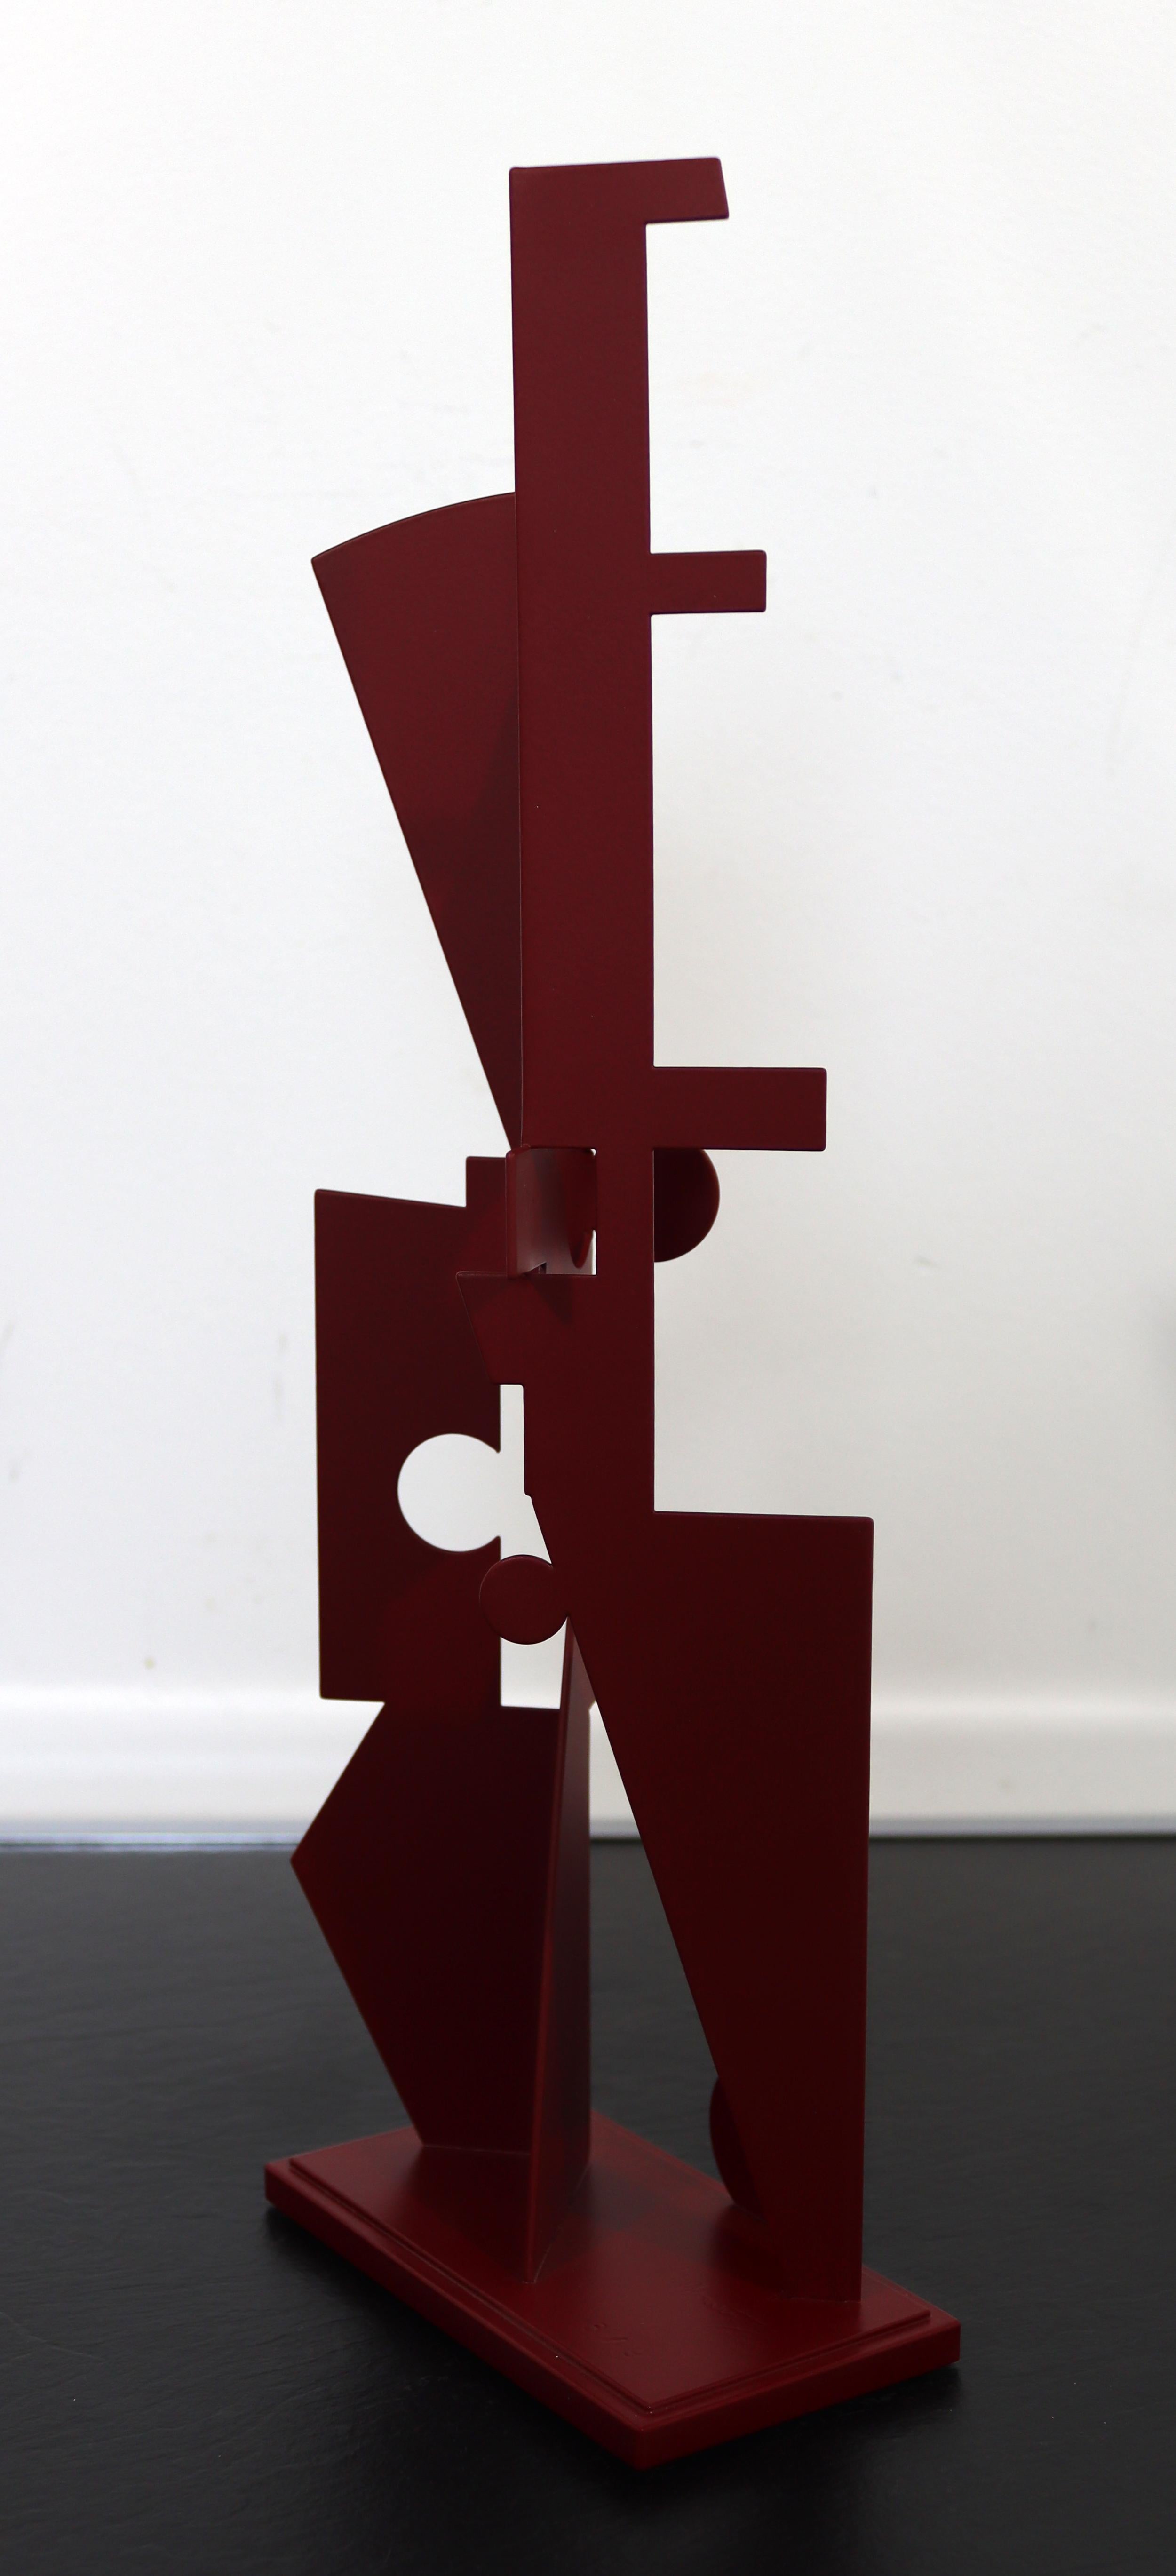 For your consideration is a spectacular red abstract modern sculpture 8/9 by Michigan artist Jay Lefkowitz (15.5 x 5.5 x 3). Lefkowitz (1952-) is a highly respected abstract artist who works in a wide variety of media and styles. His works are